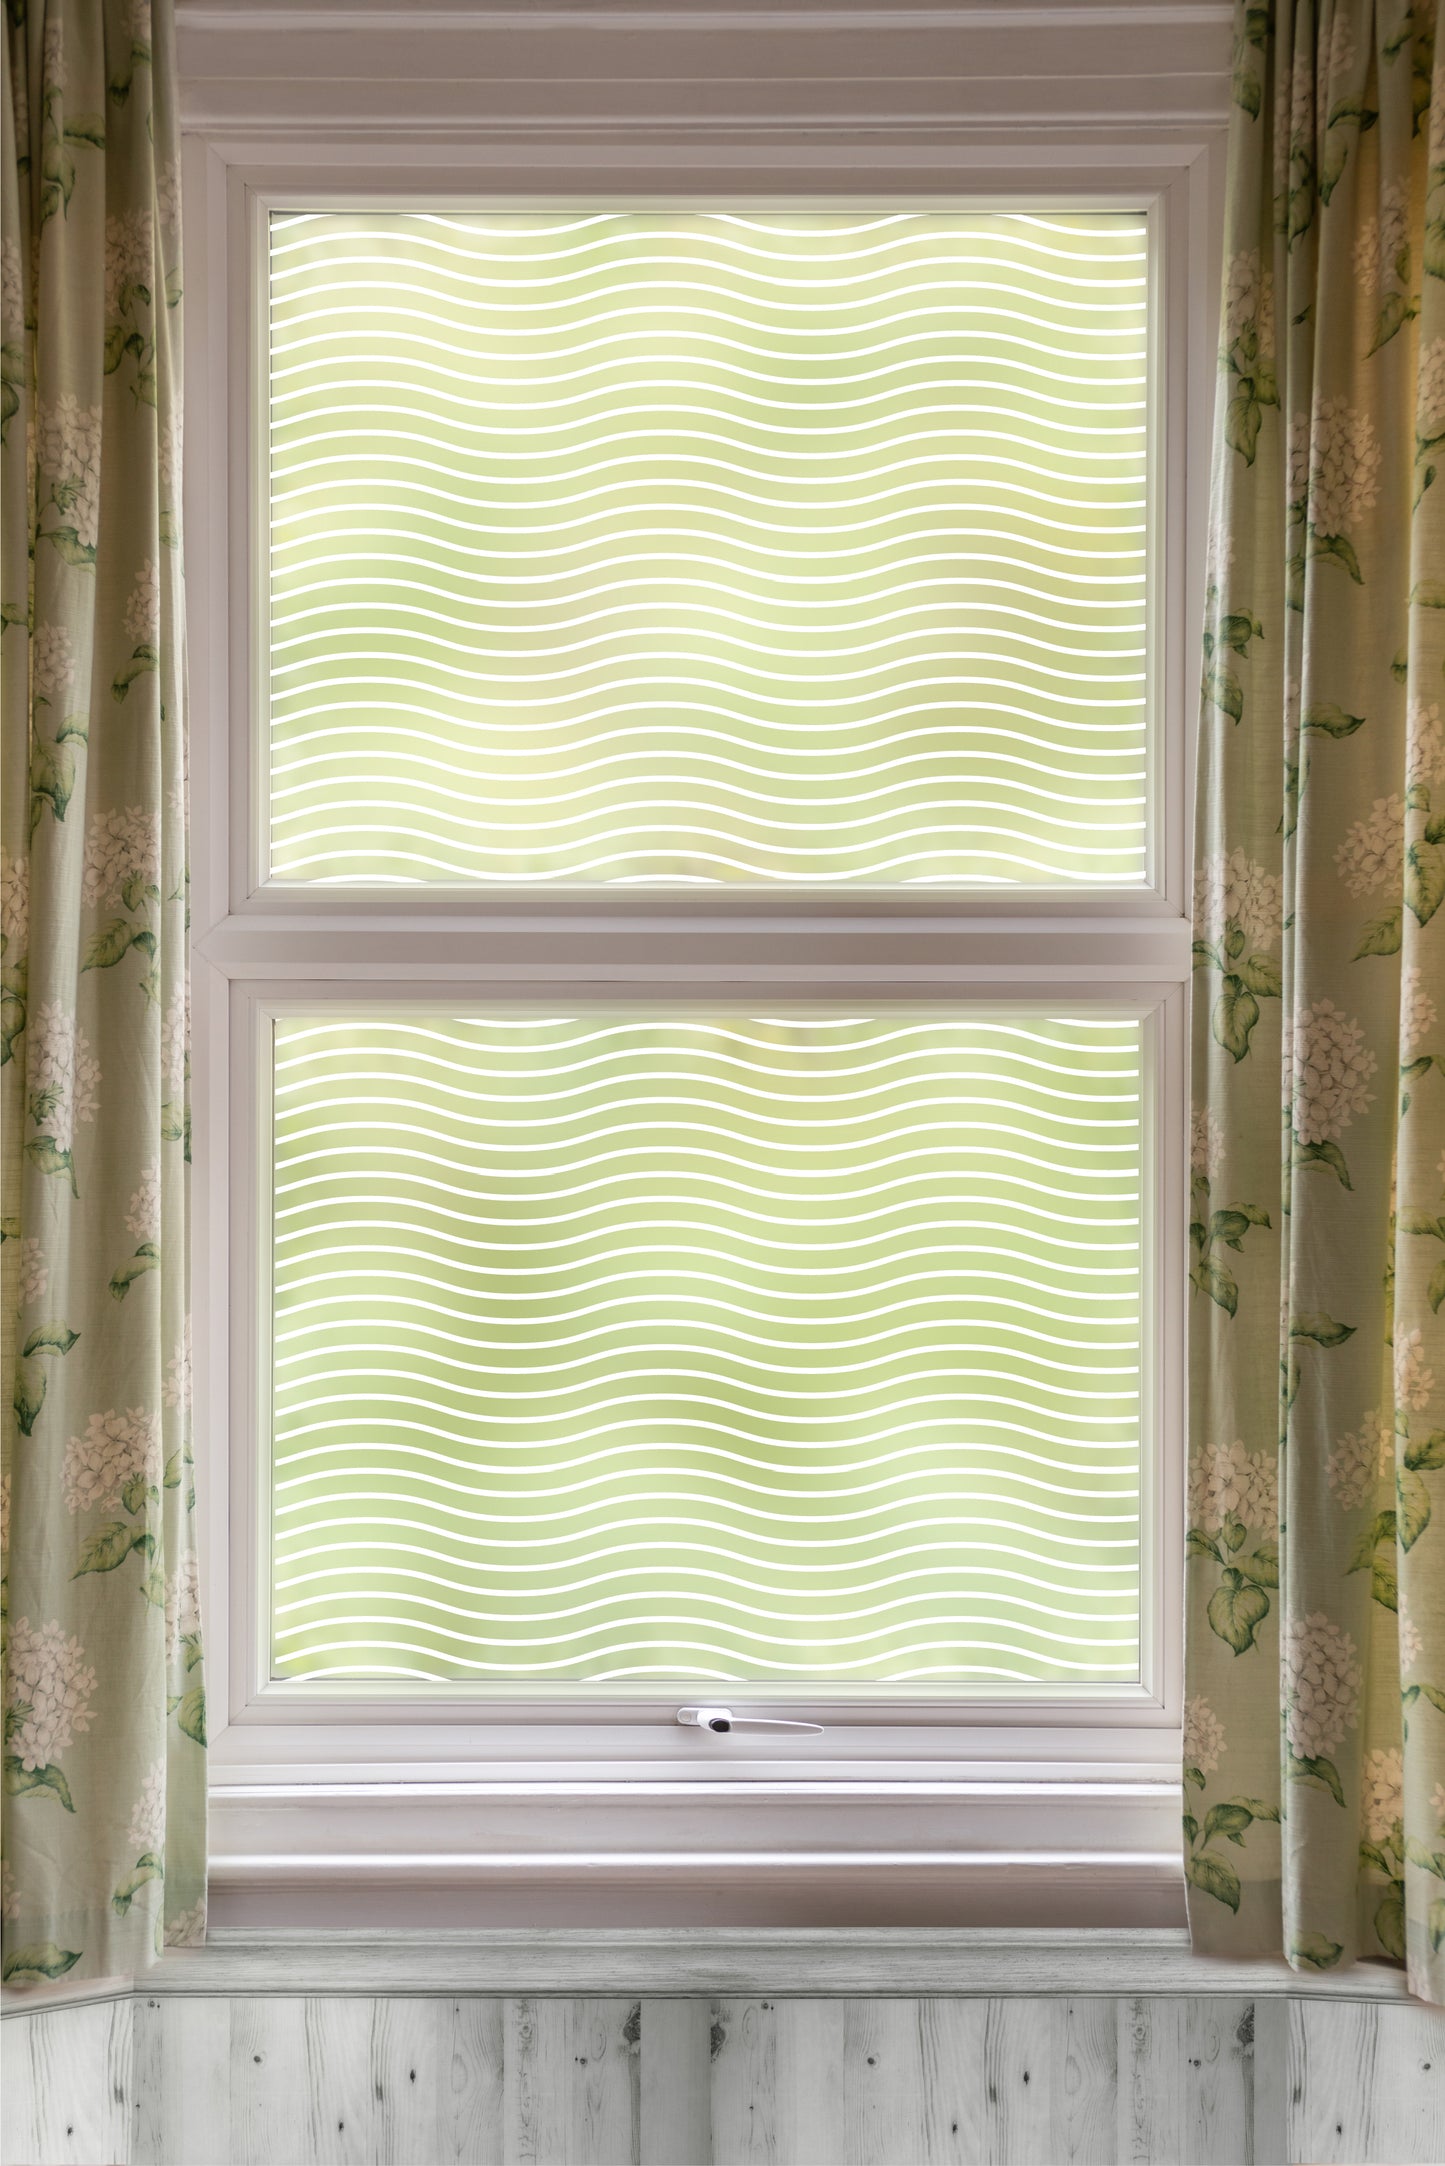 Wavy Lines Frosted Window Privacy Film